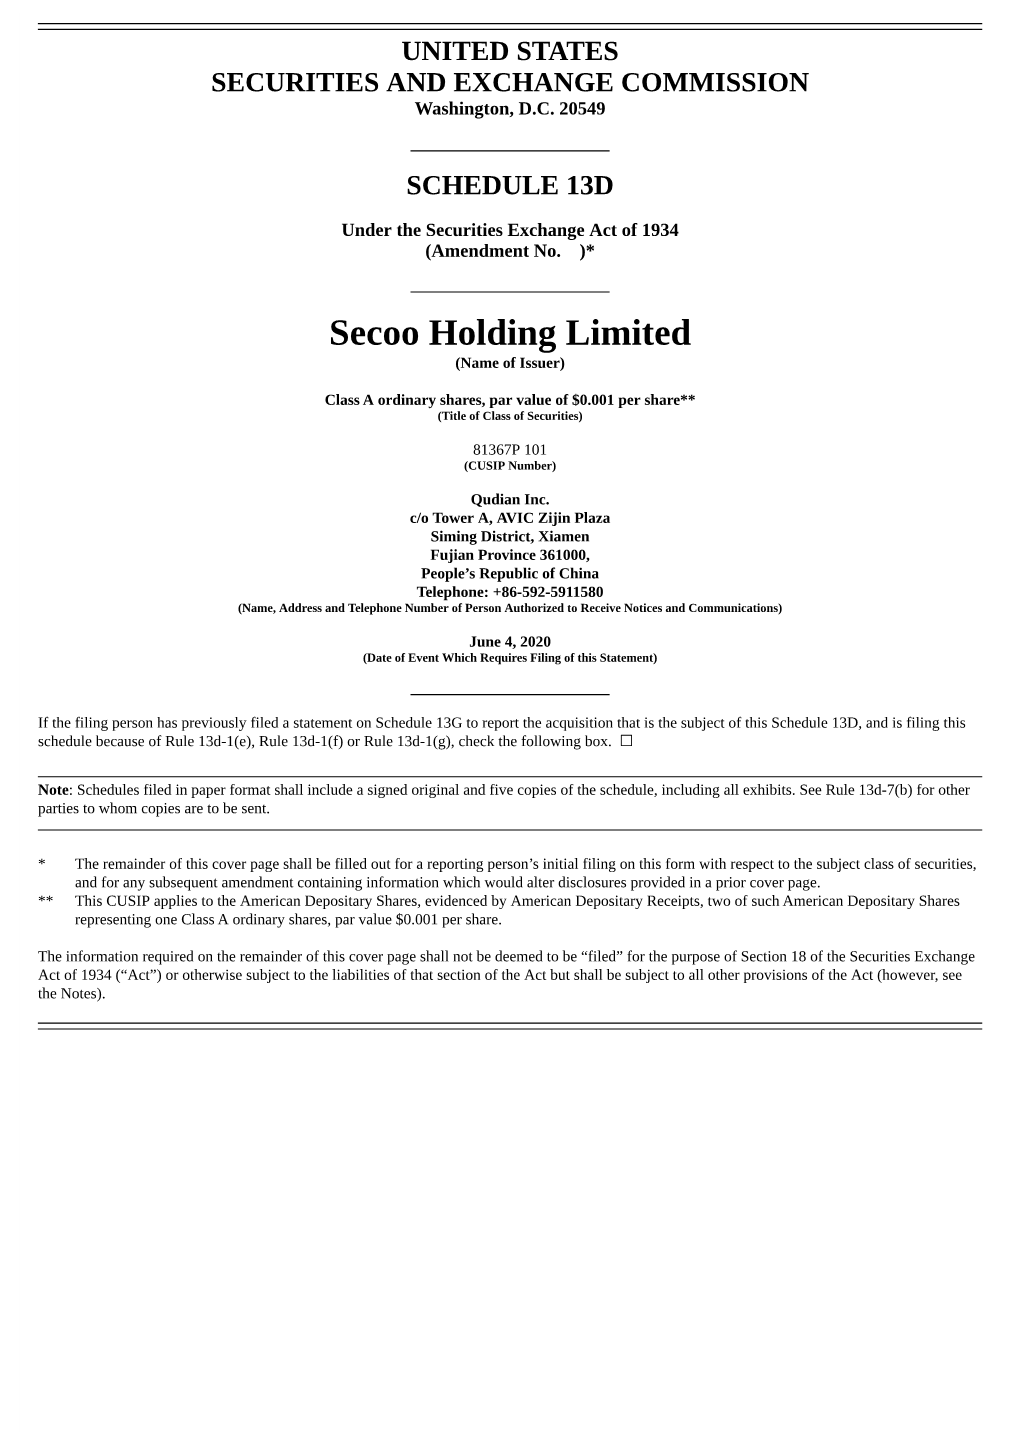 Secoo Holding Limited (Name of Issuer)